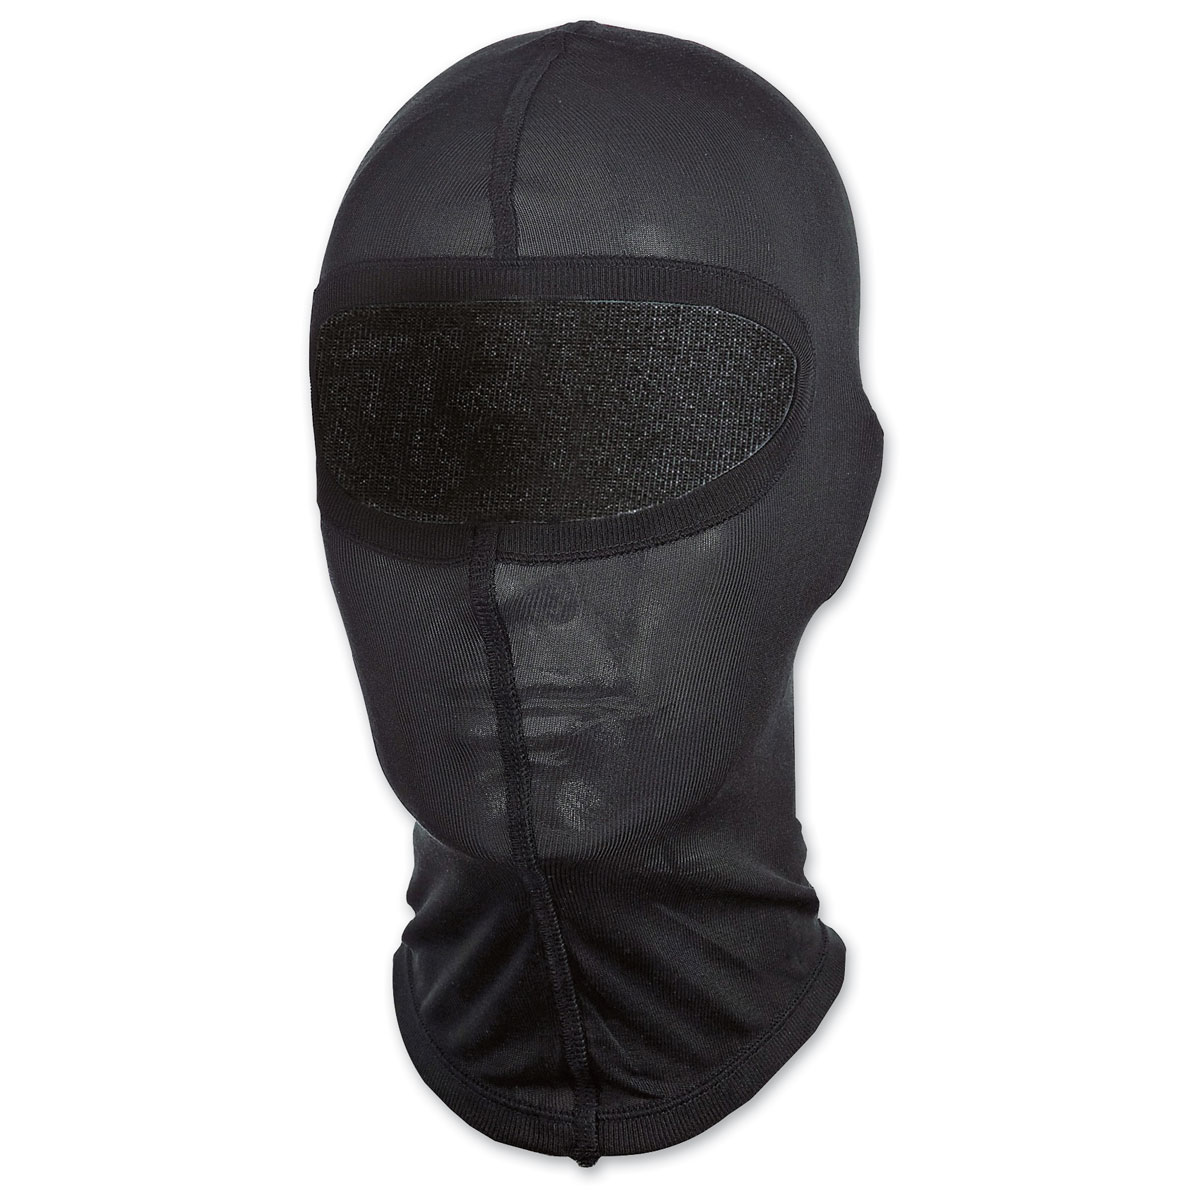 Viewing Images For Dainese Silk Balaclava (SOLD OUT) :: MotorcycleGear.com